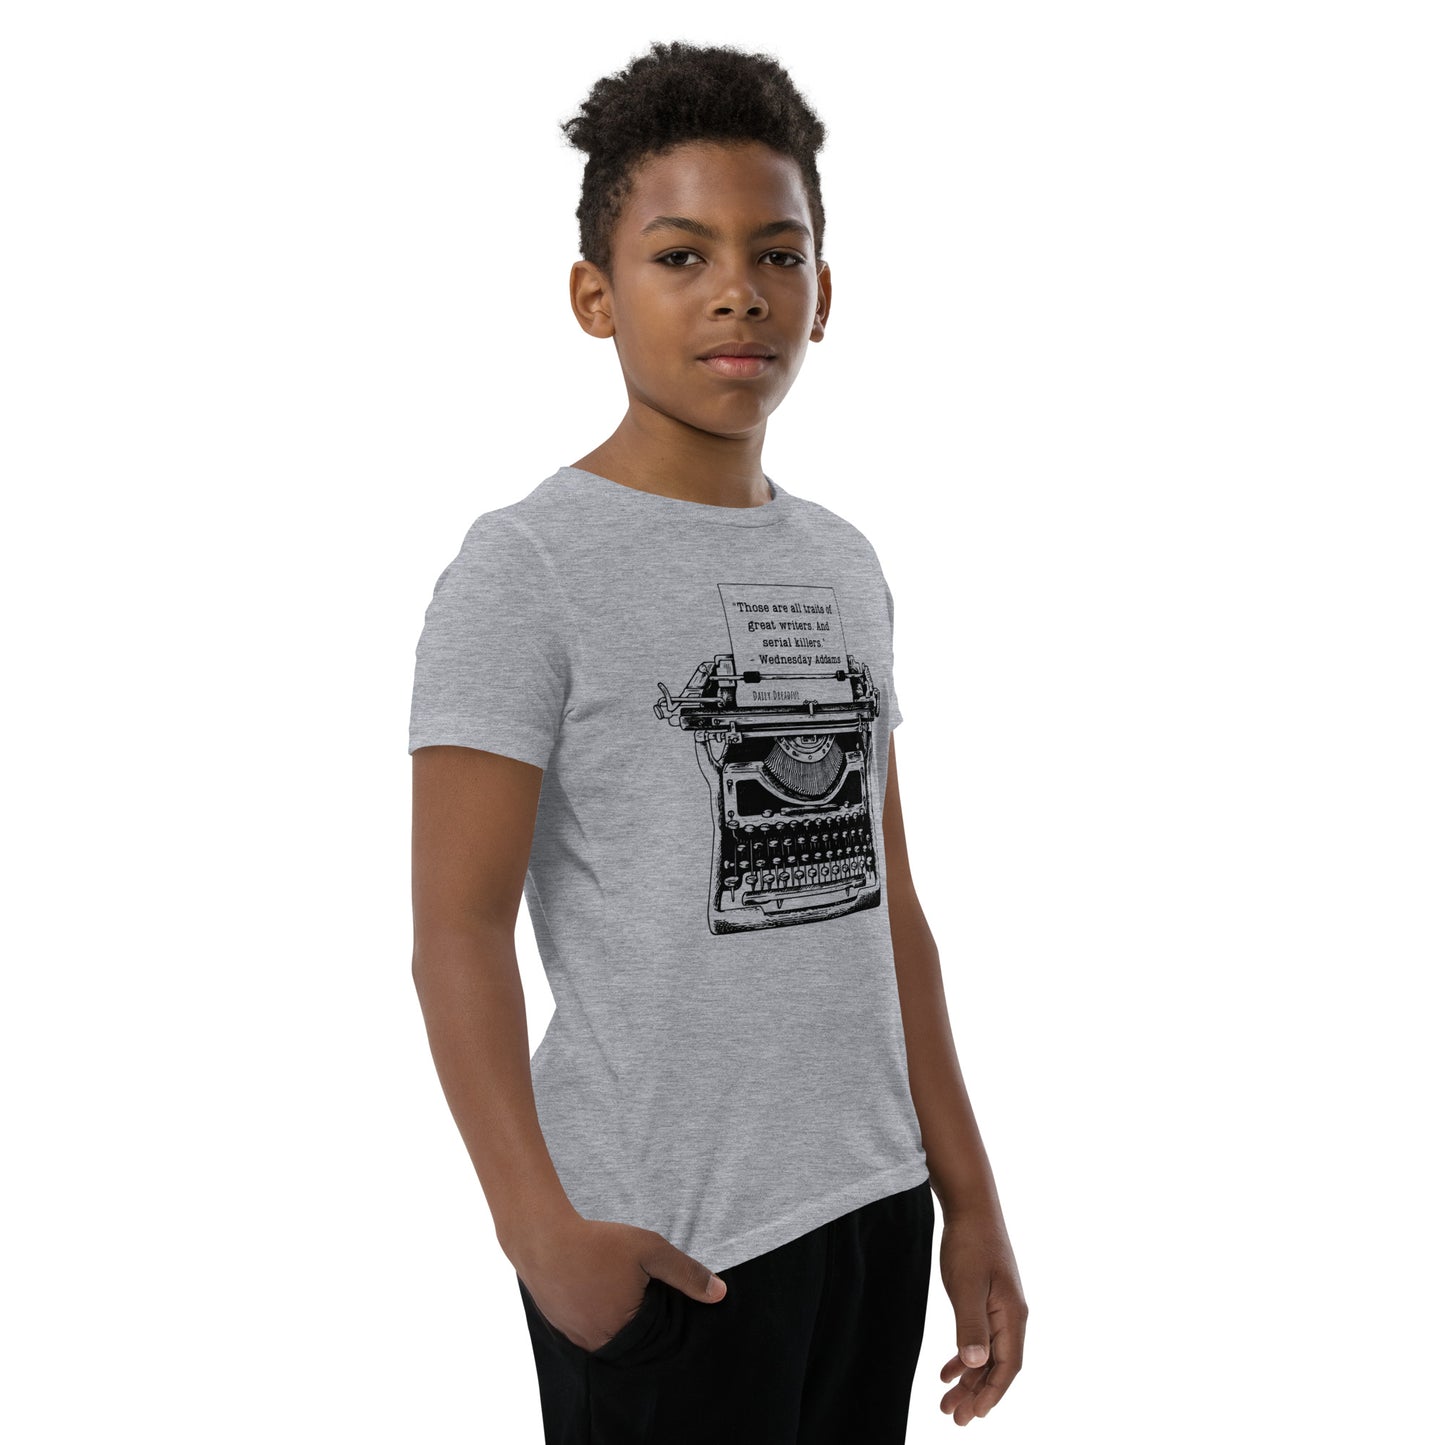 athletic heather "Wednesday Addams Typewriter" Youth Short Sleeve T-Shirt from Daily Dreadful